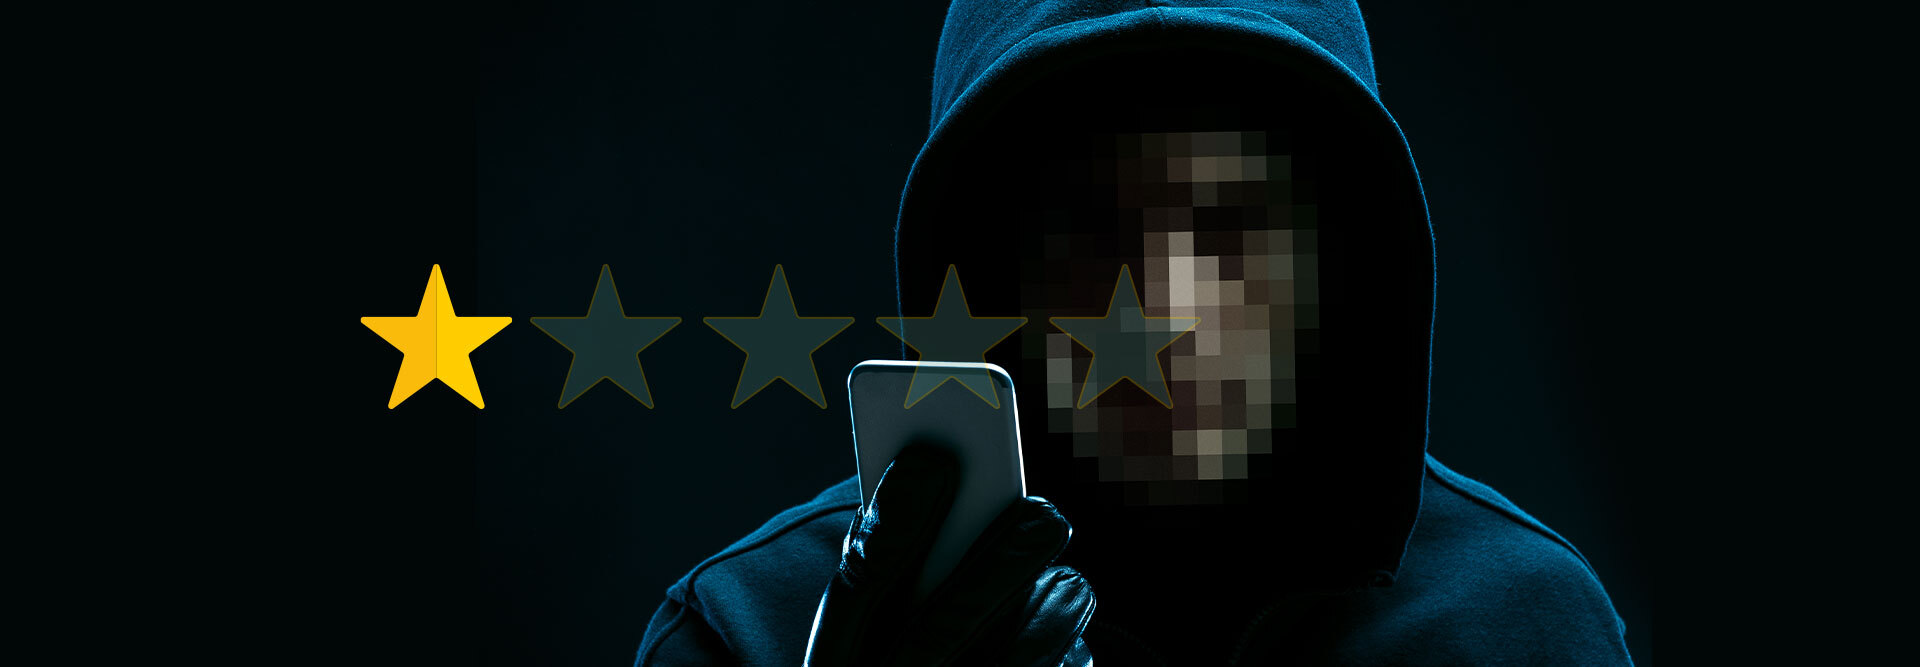 A man with a pixelated face and a dark hood is holding a smartphone. In front of this image there’s a 1-star review. We assume he wrote this fake review. This is to indicate fake reviews being online and the struggles businesses face.